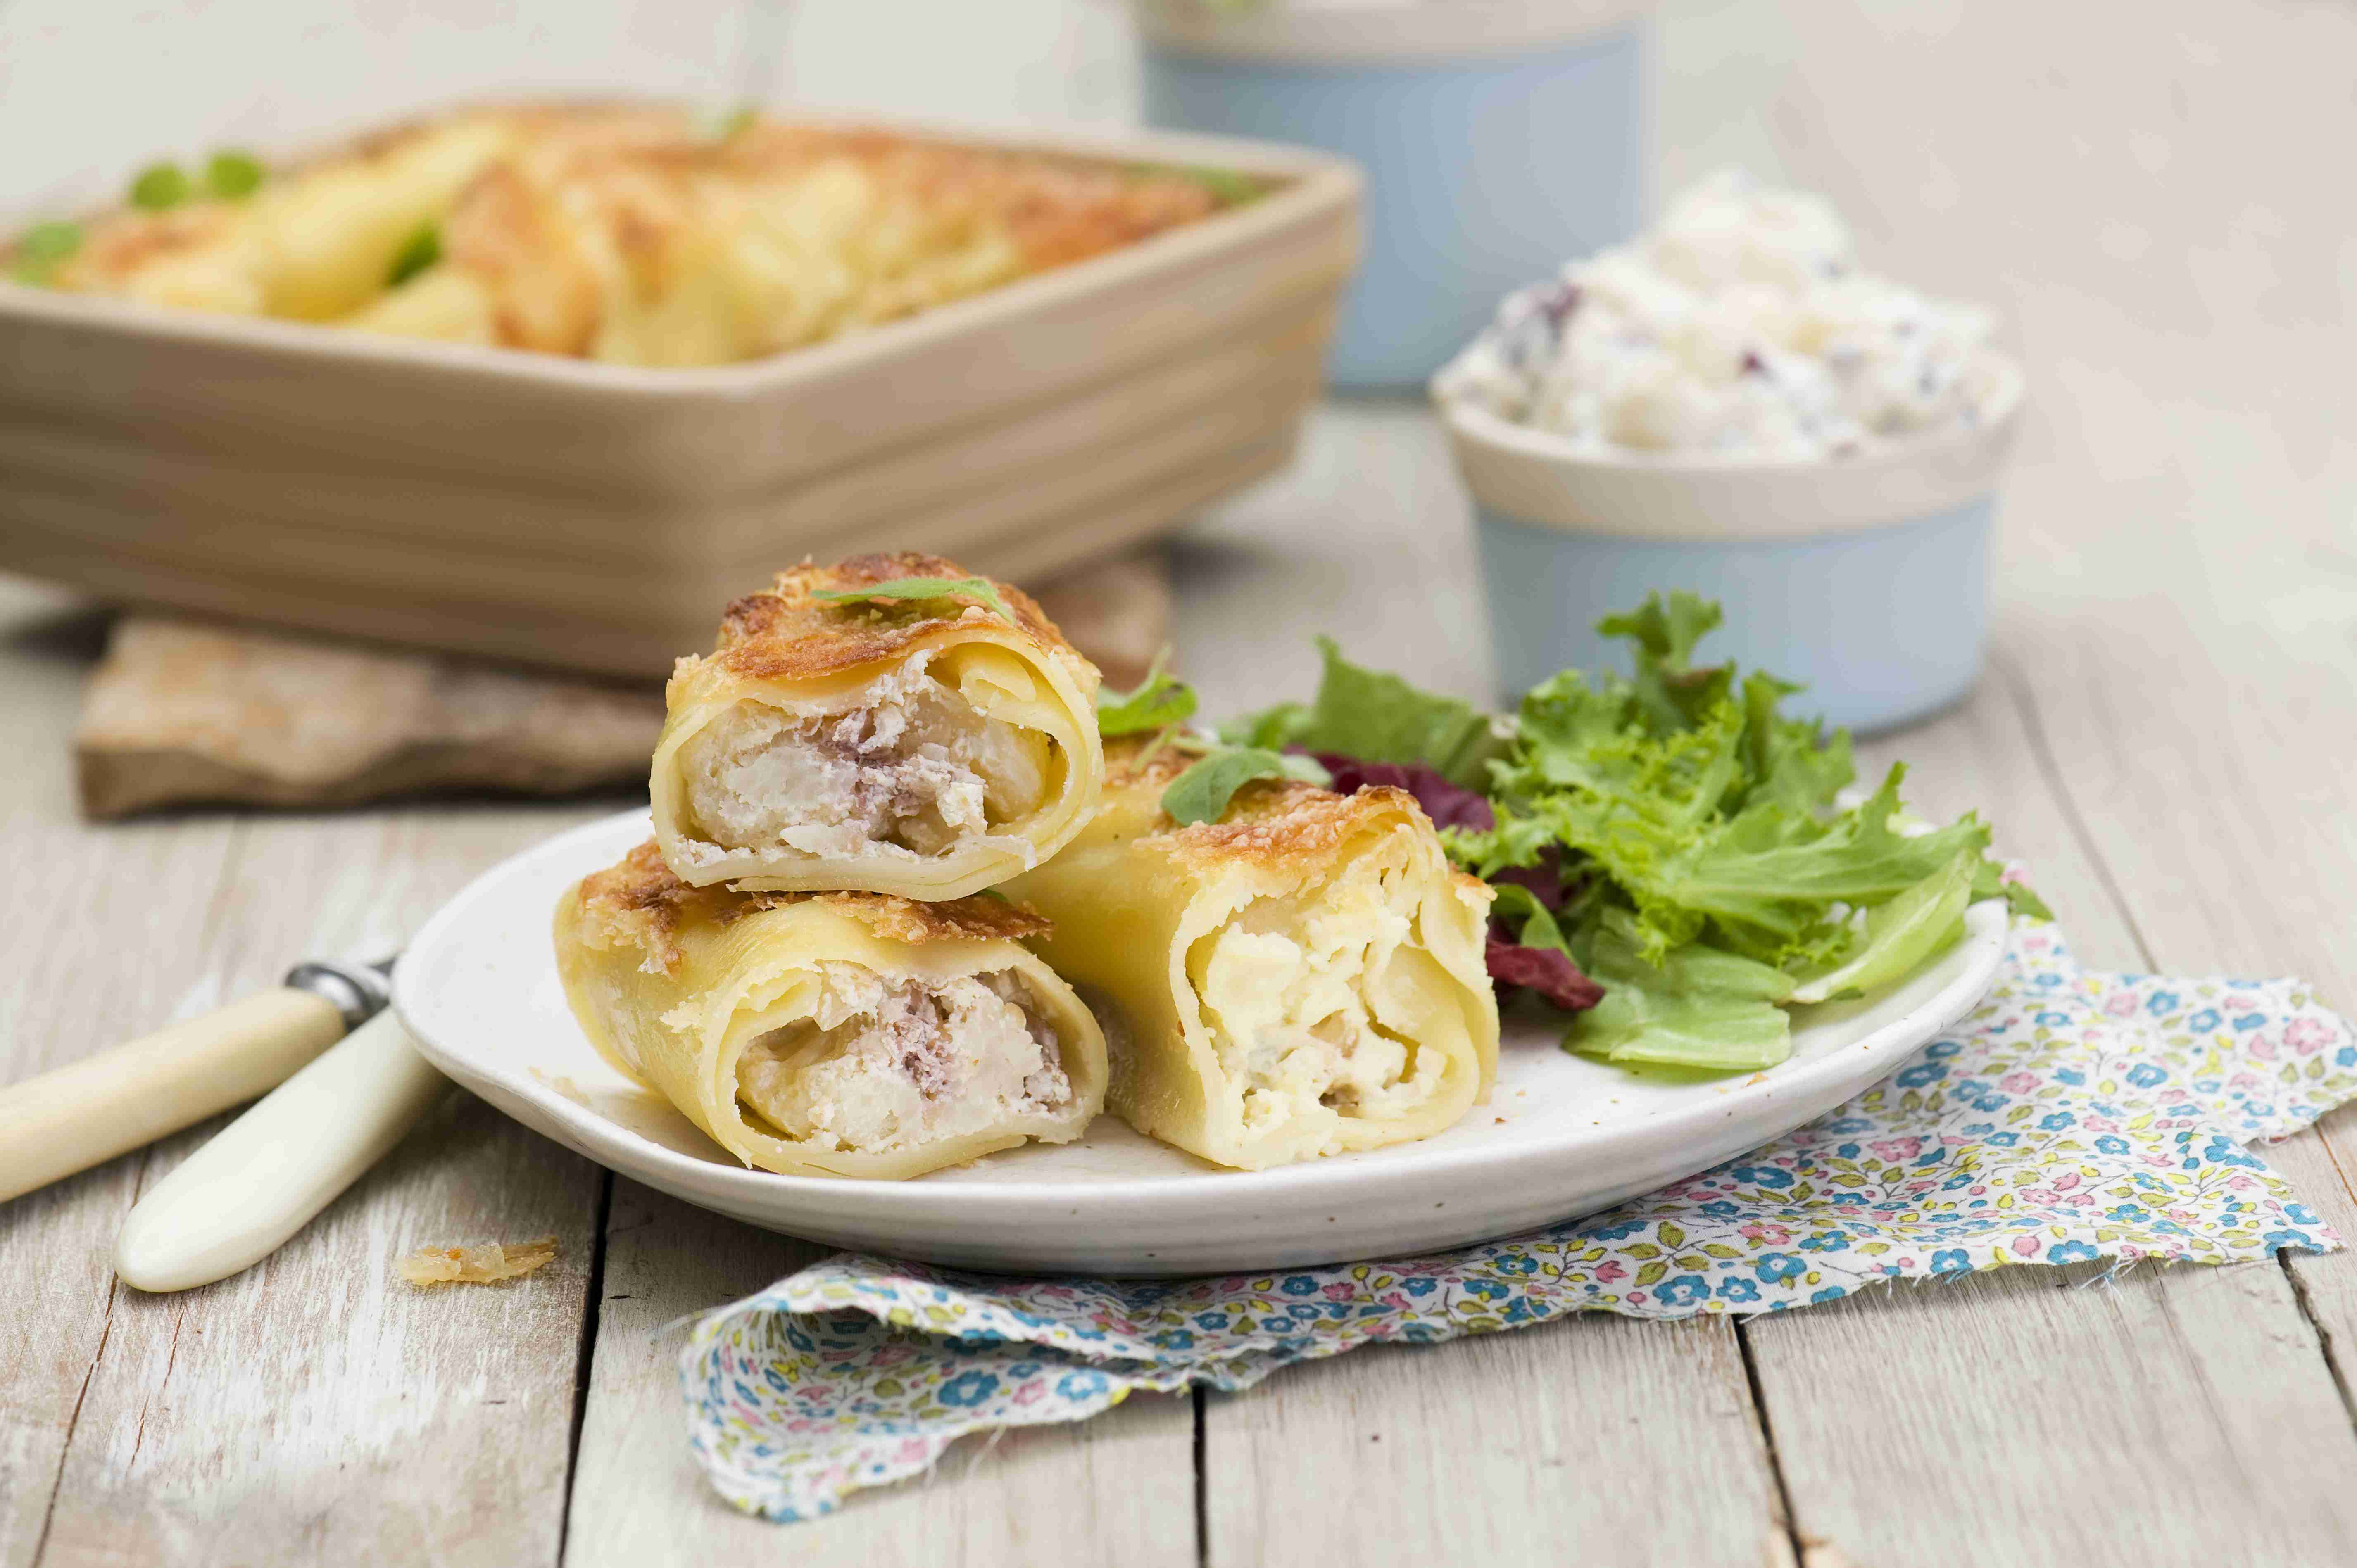 Cannelloni with ricotta cheese, cauliflower and radicchio lettuce